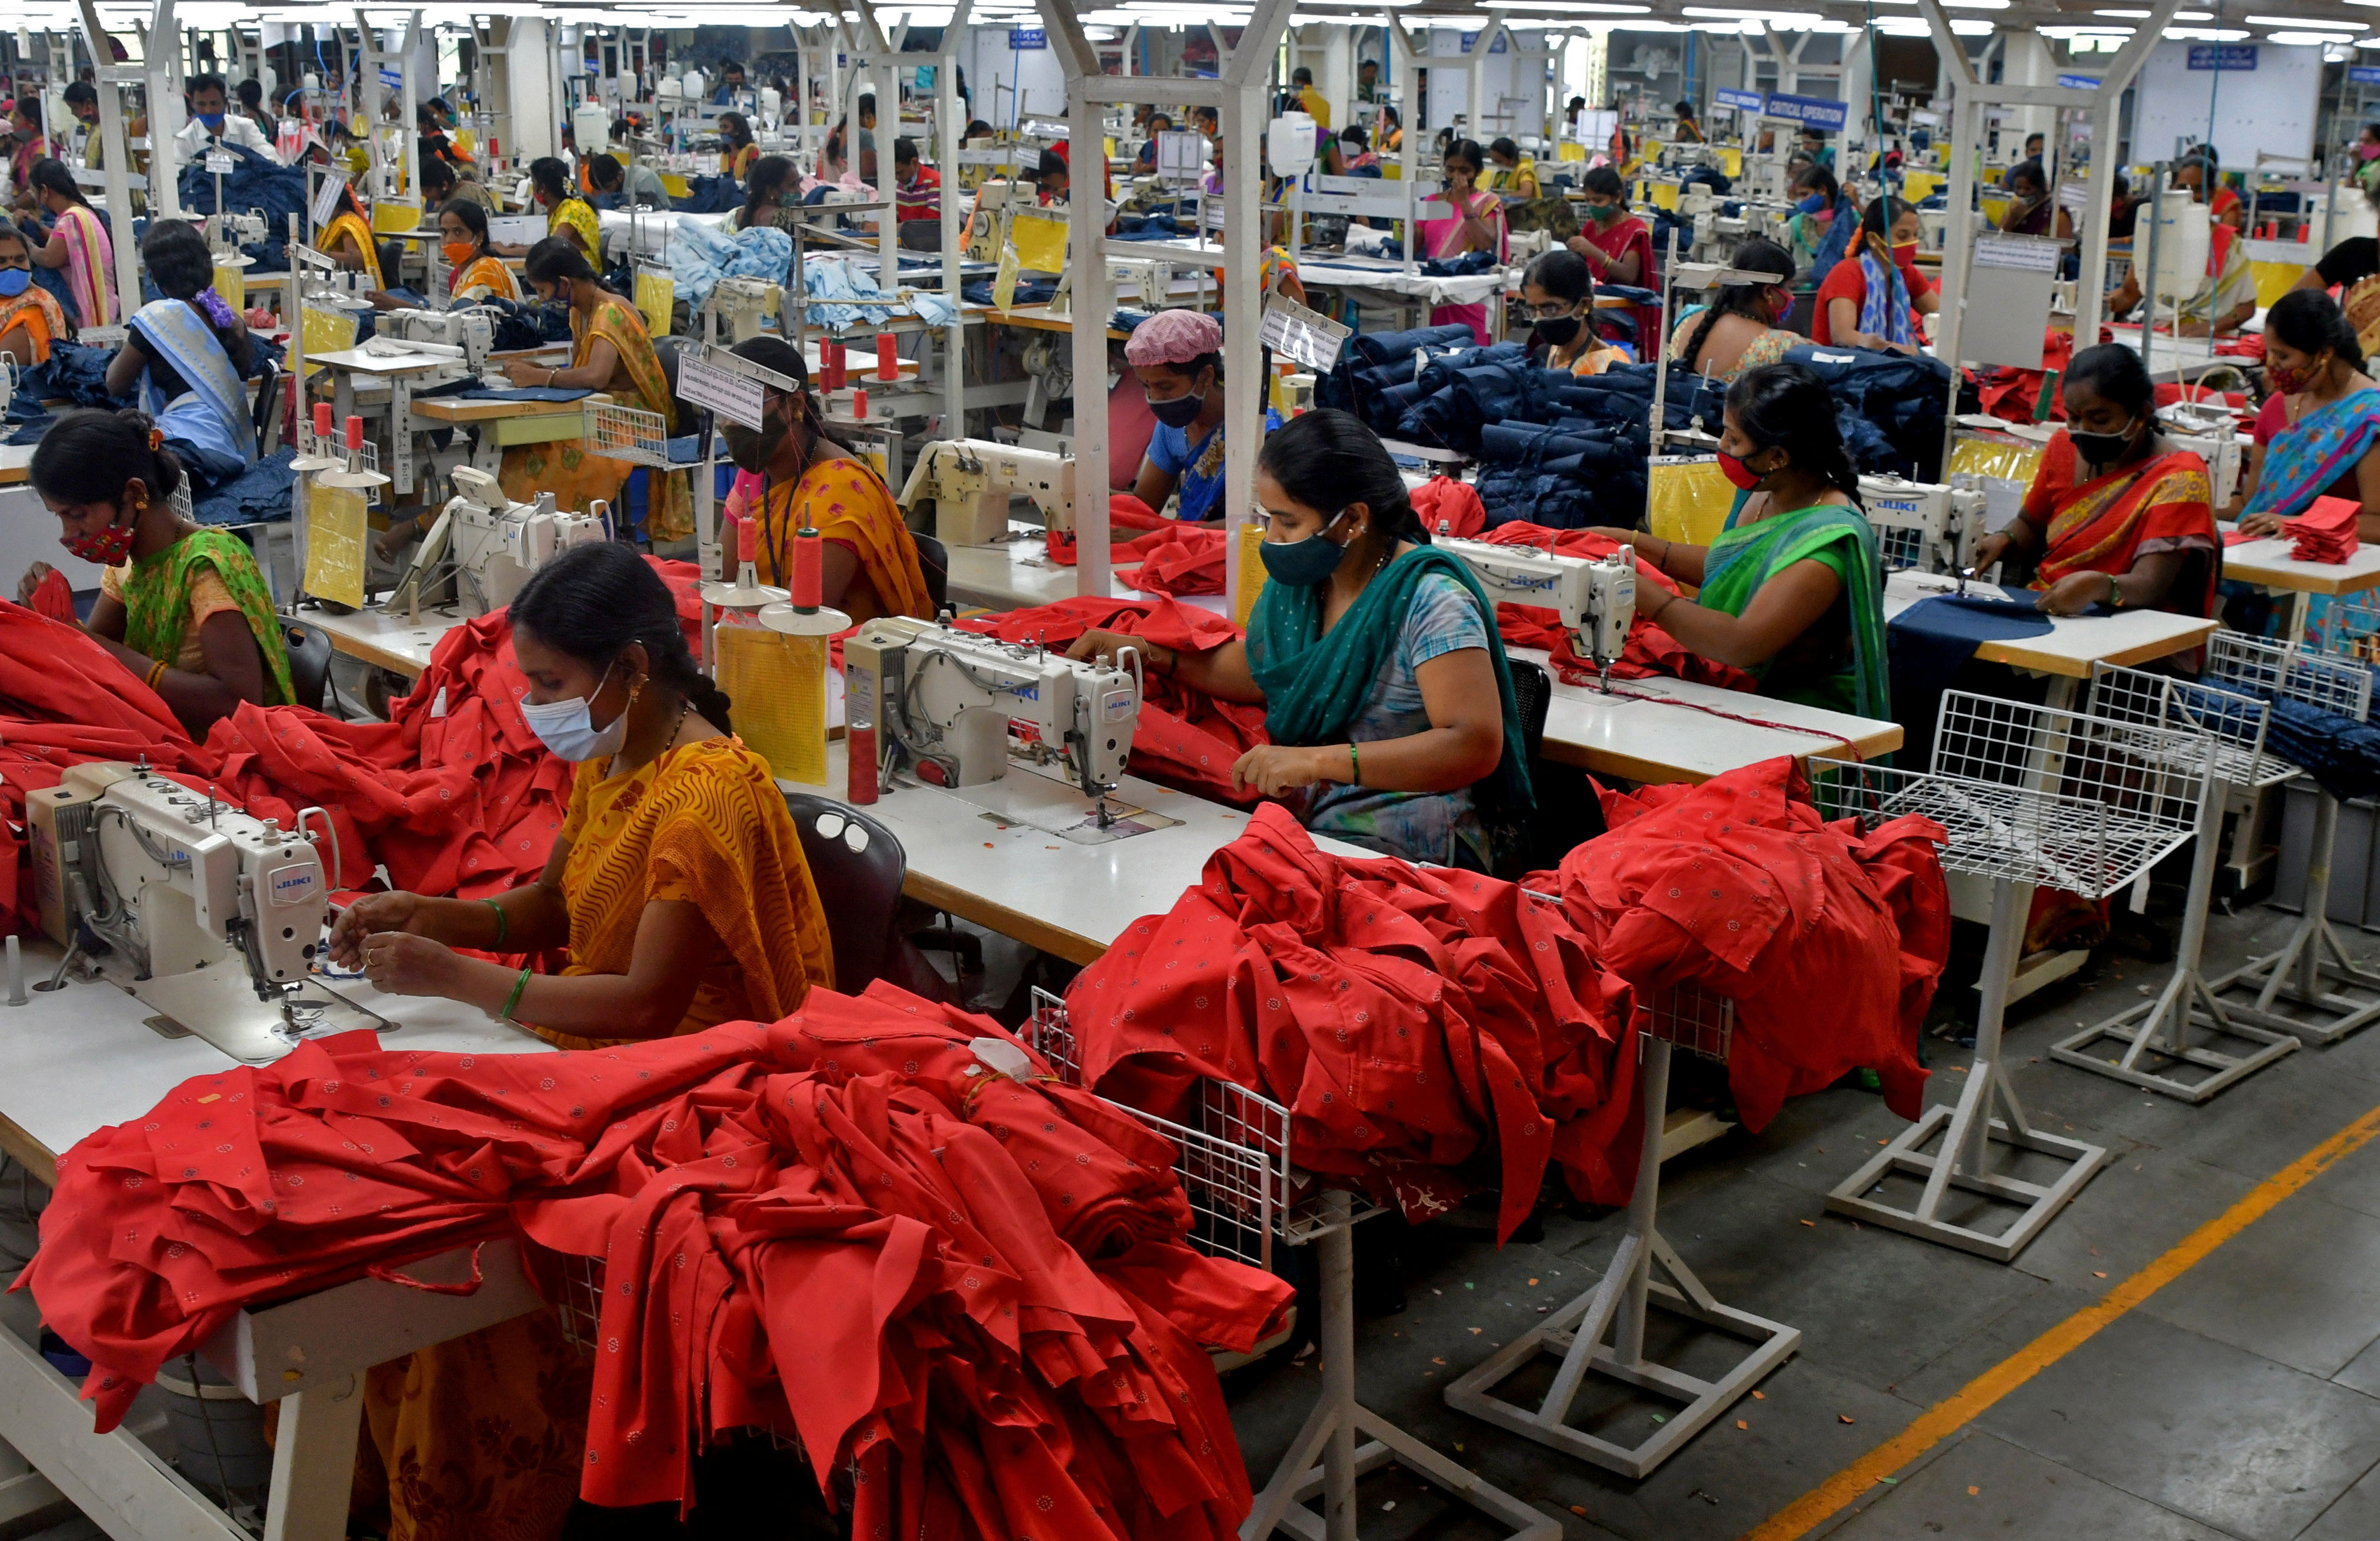 Focus: India's textile industry revs up, giving hope on jobs for